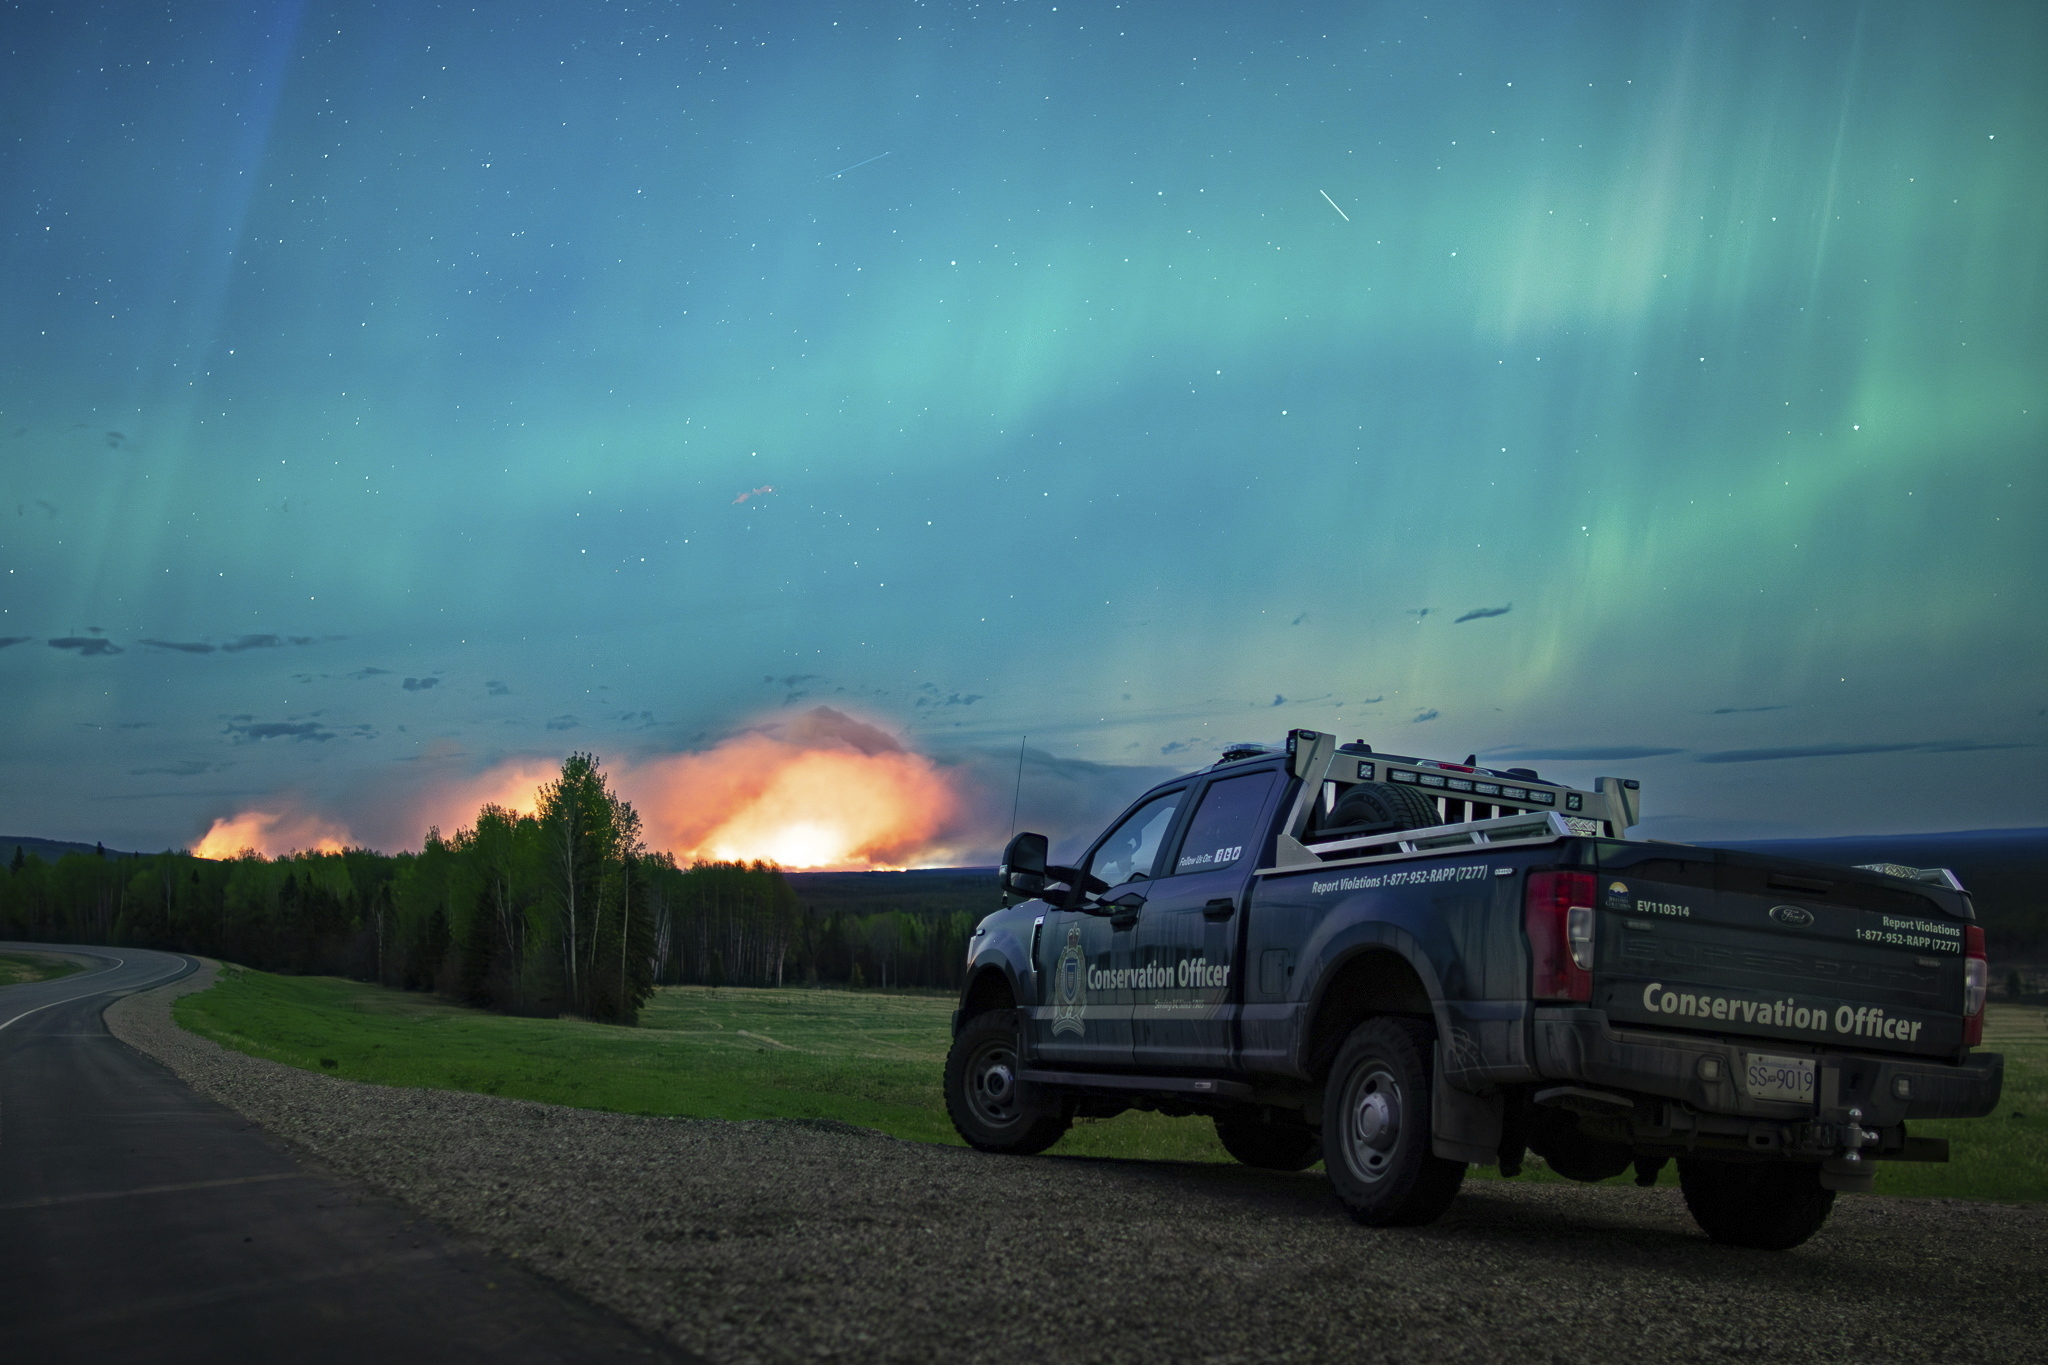 An Aurora Borealis is pictured near Fort Nelson, British Columbia, on Saturday. An intense wildfire could hit a town in western Canada on Monday, based on forecasts of strong winds that have been fueling the out-of-control blaze which has already forced the evacuation of thousands, fire experts and officials warned.